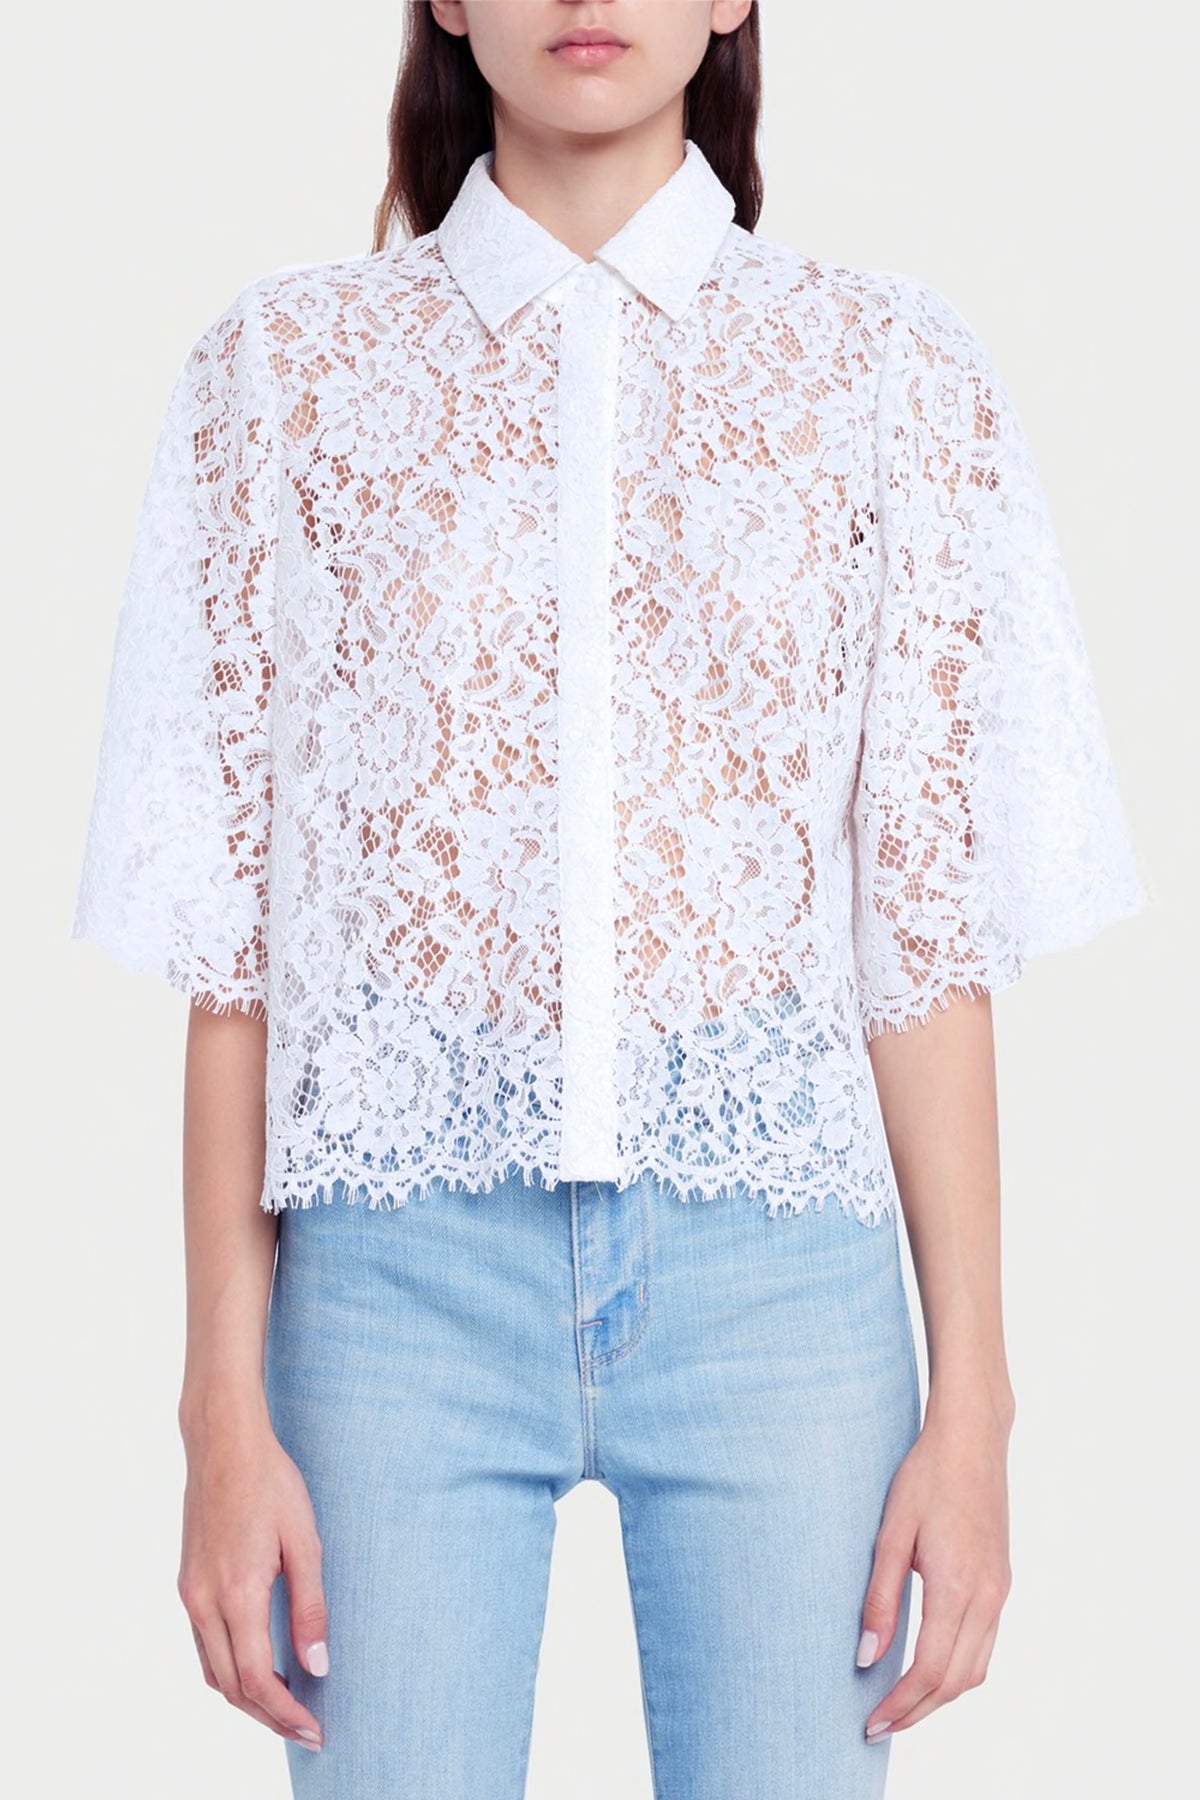 L'Agence Fern Bell Sleeve Lace Blouse